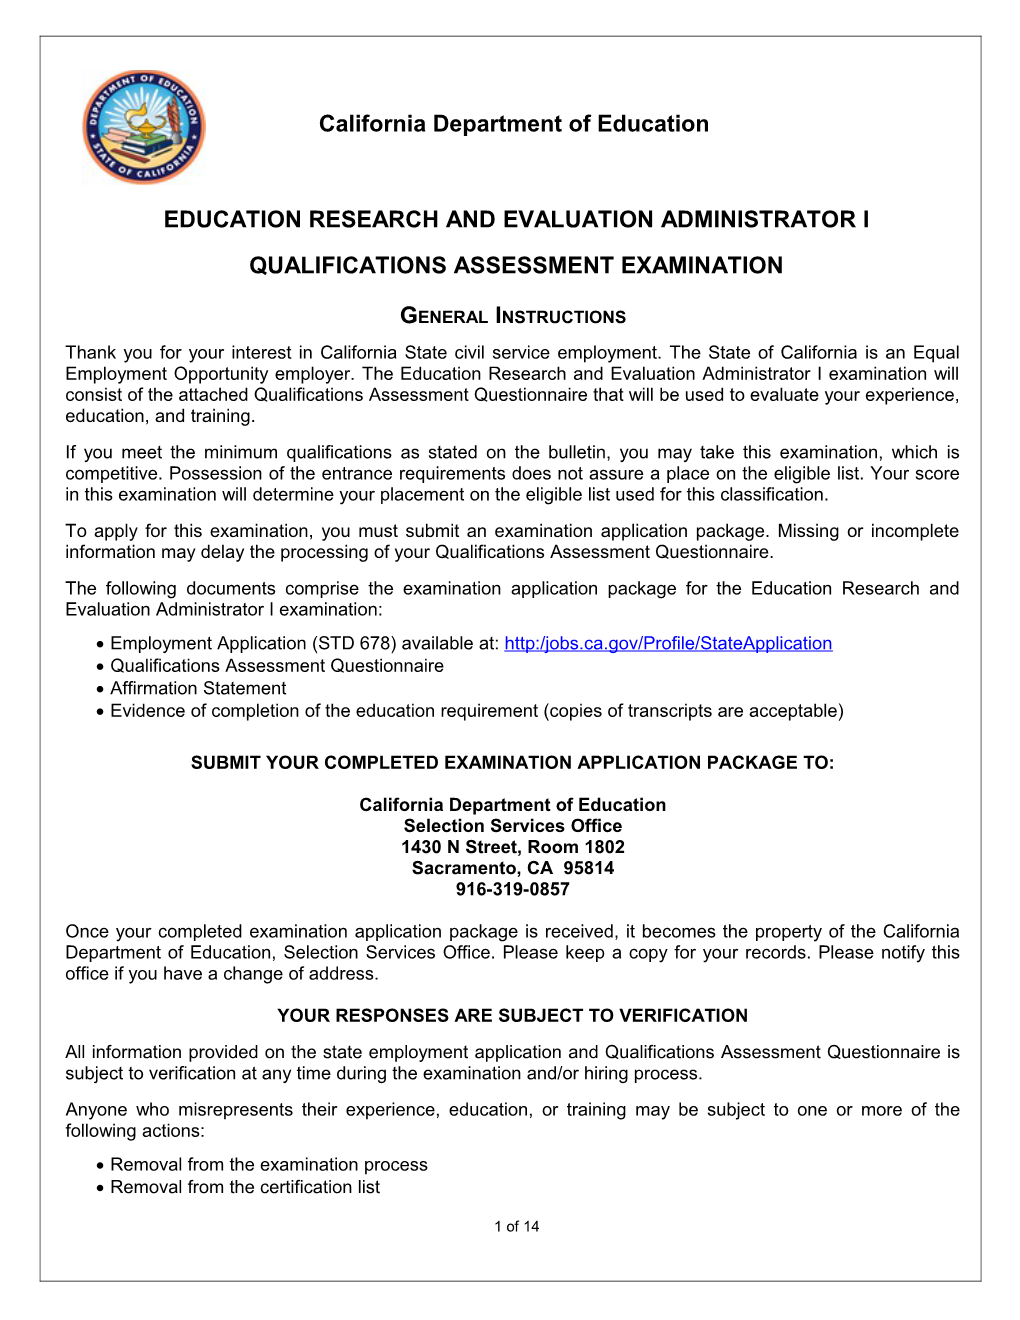 Education Research and Evaluation Administrator I Questionnaire - Jobs at CDE (CA Dept